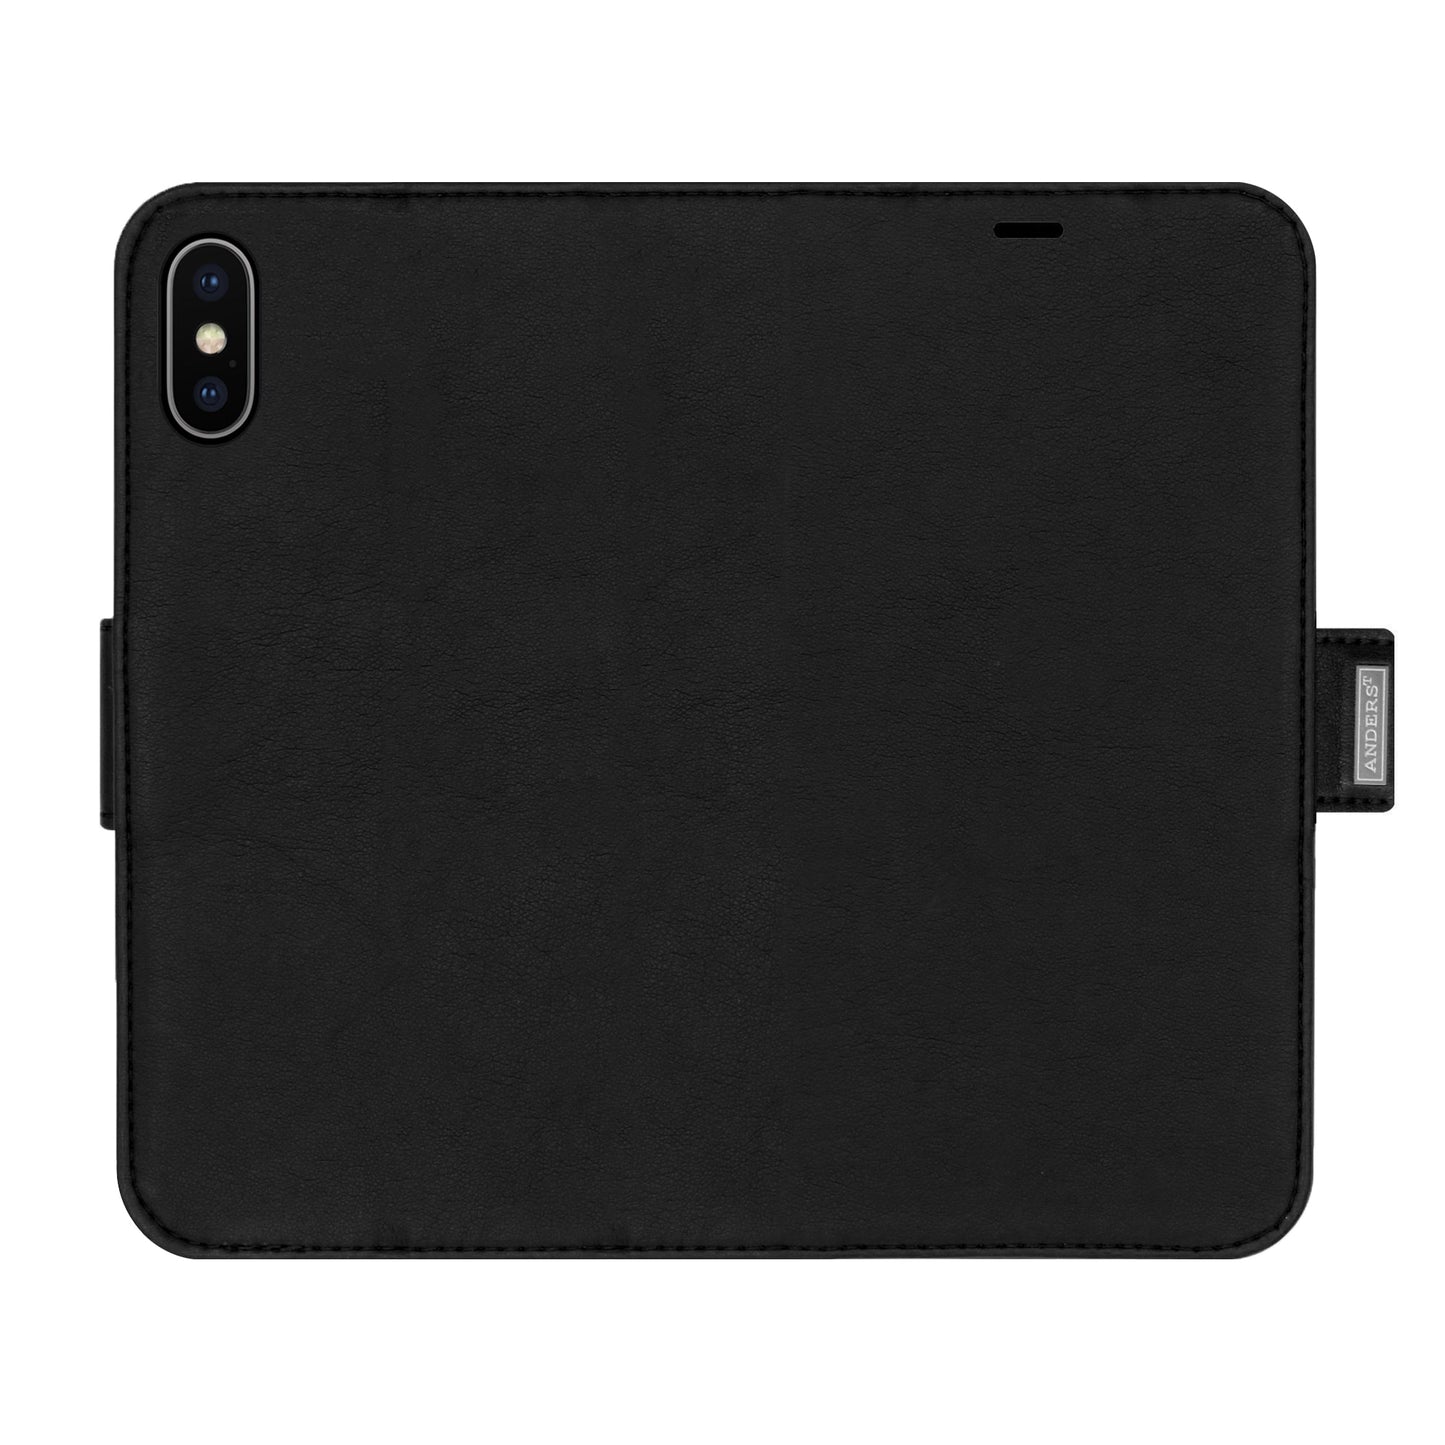 Uni Black Victor Case for iPhone X/XS